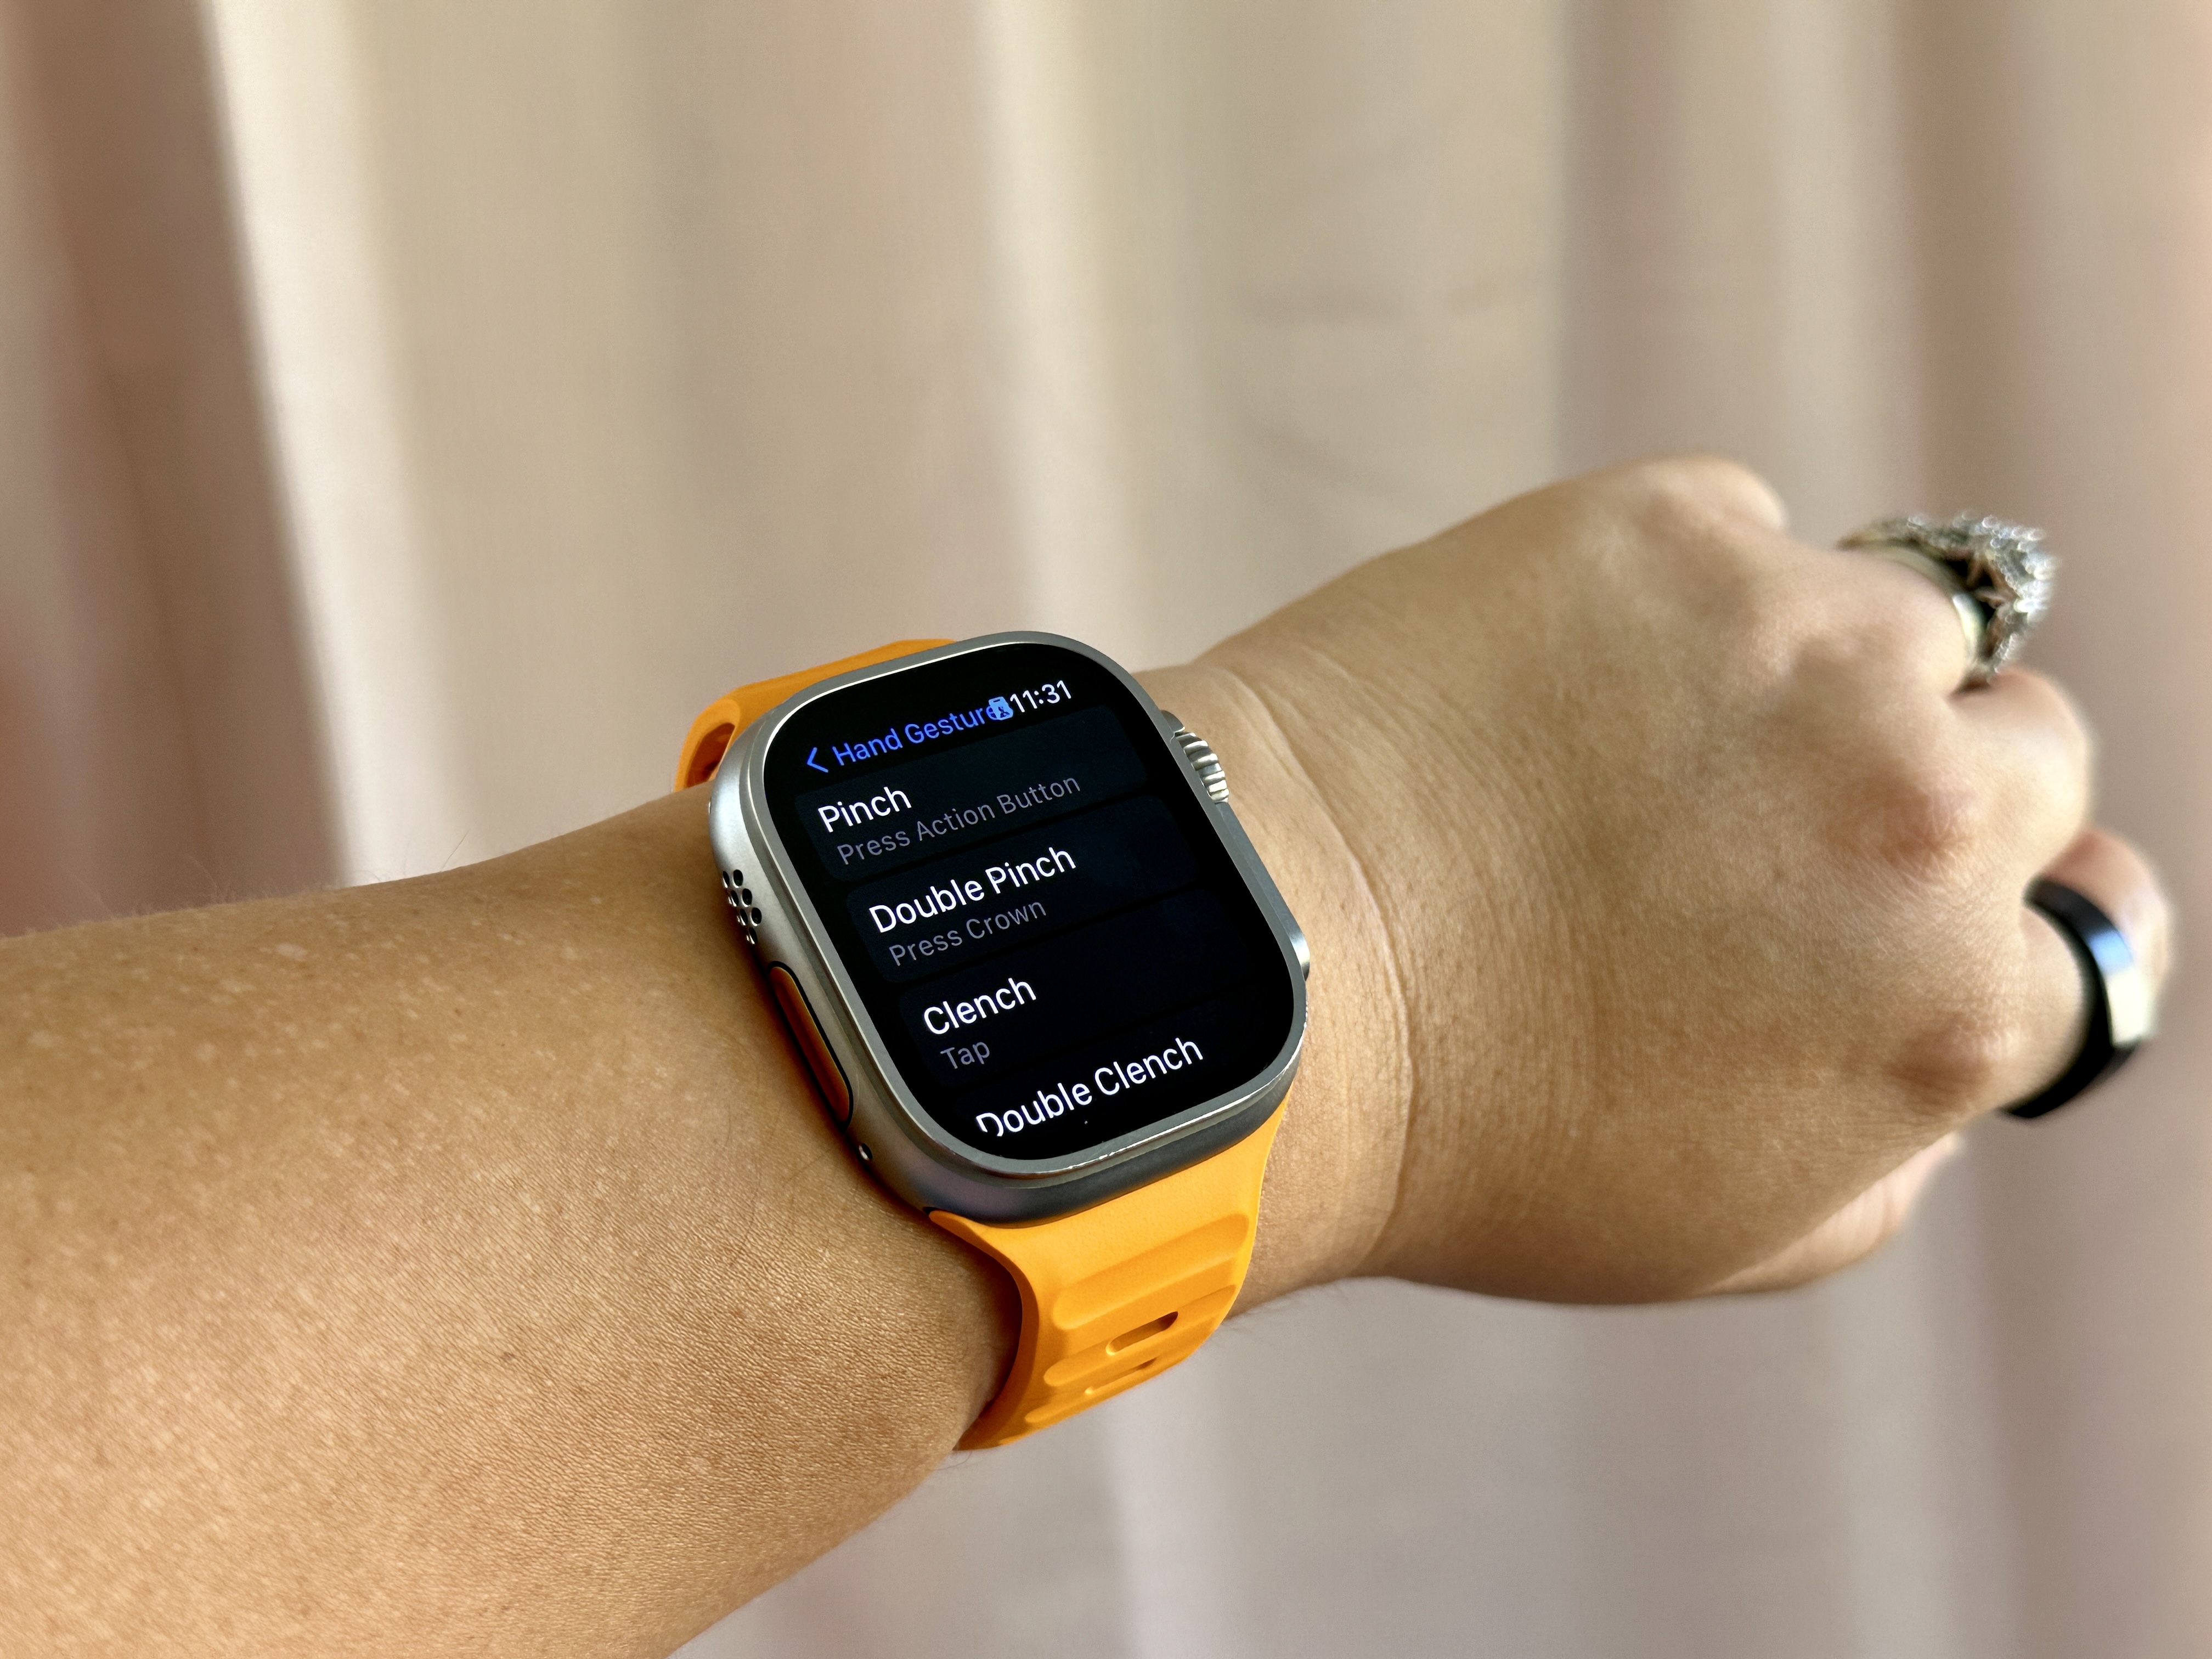 How to get Double Tap on your existing Apple Watch